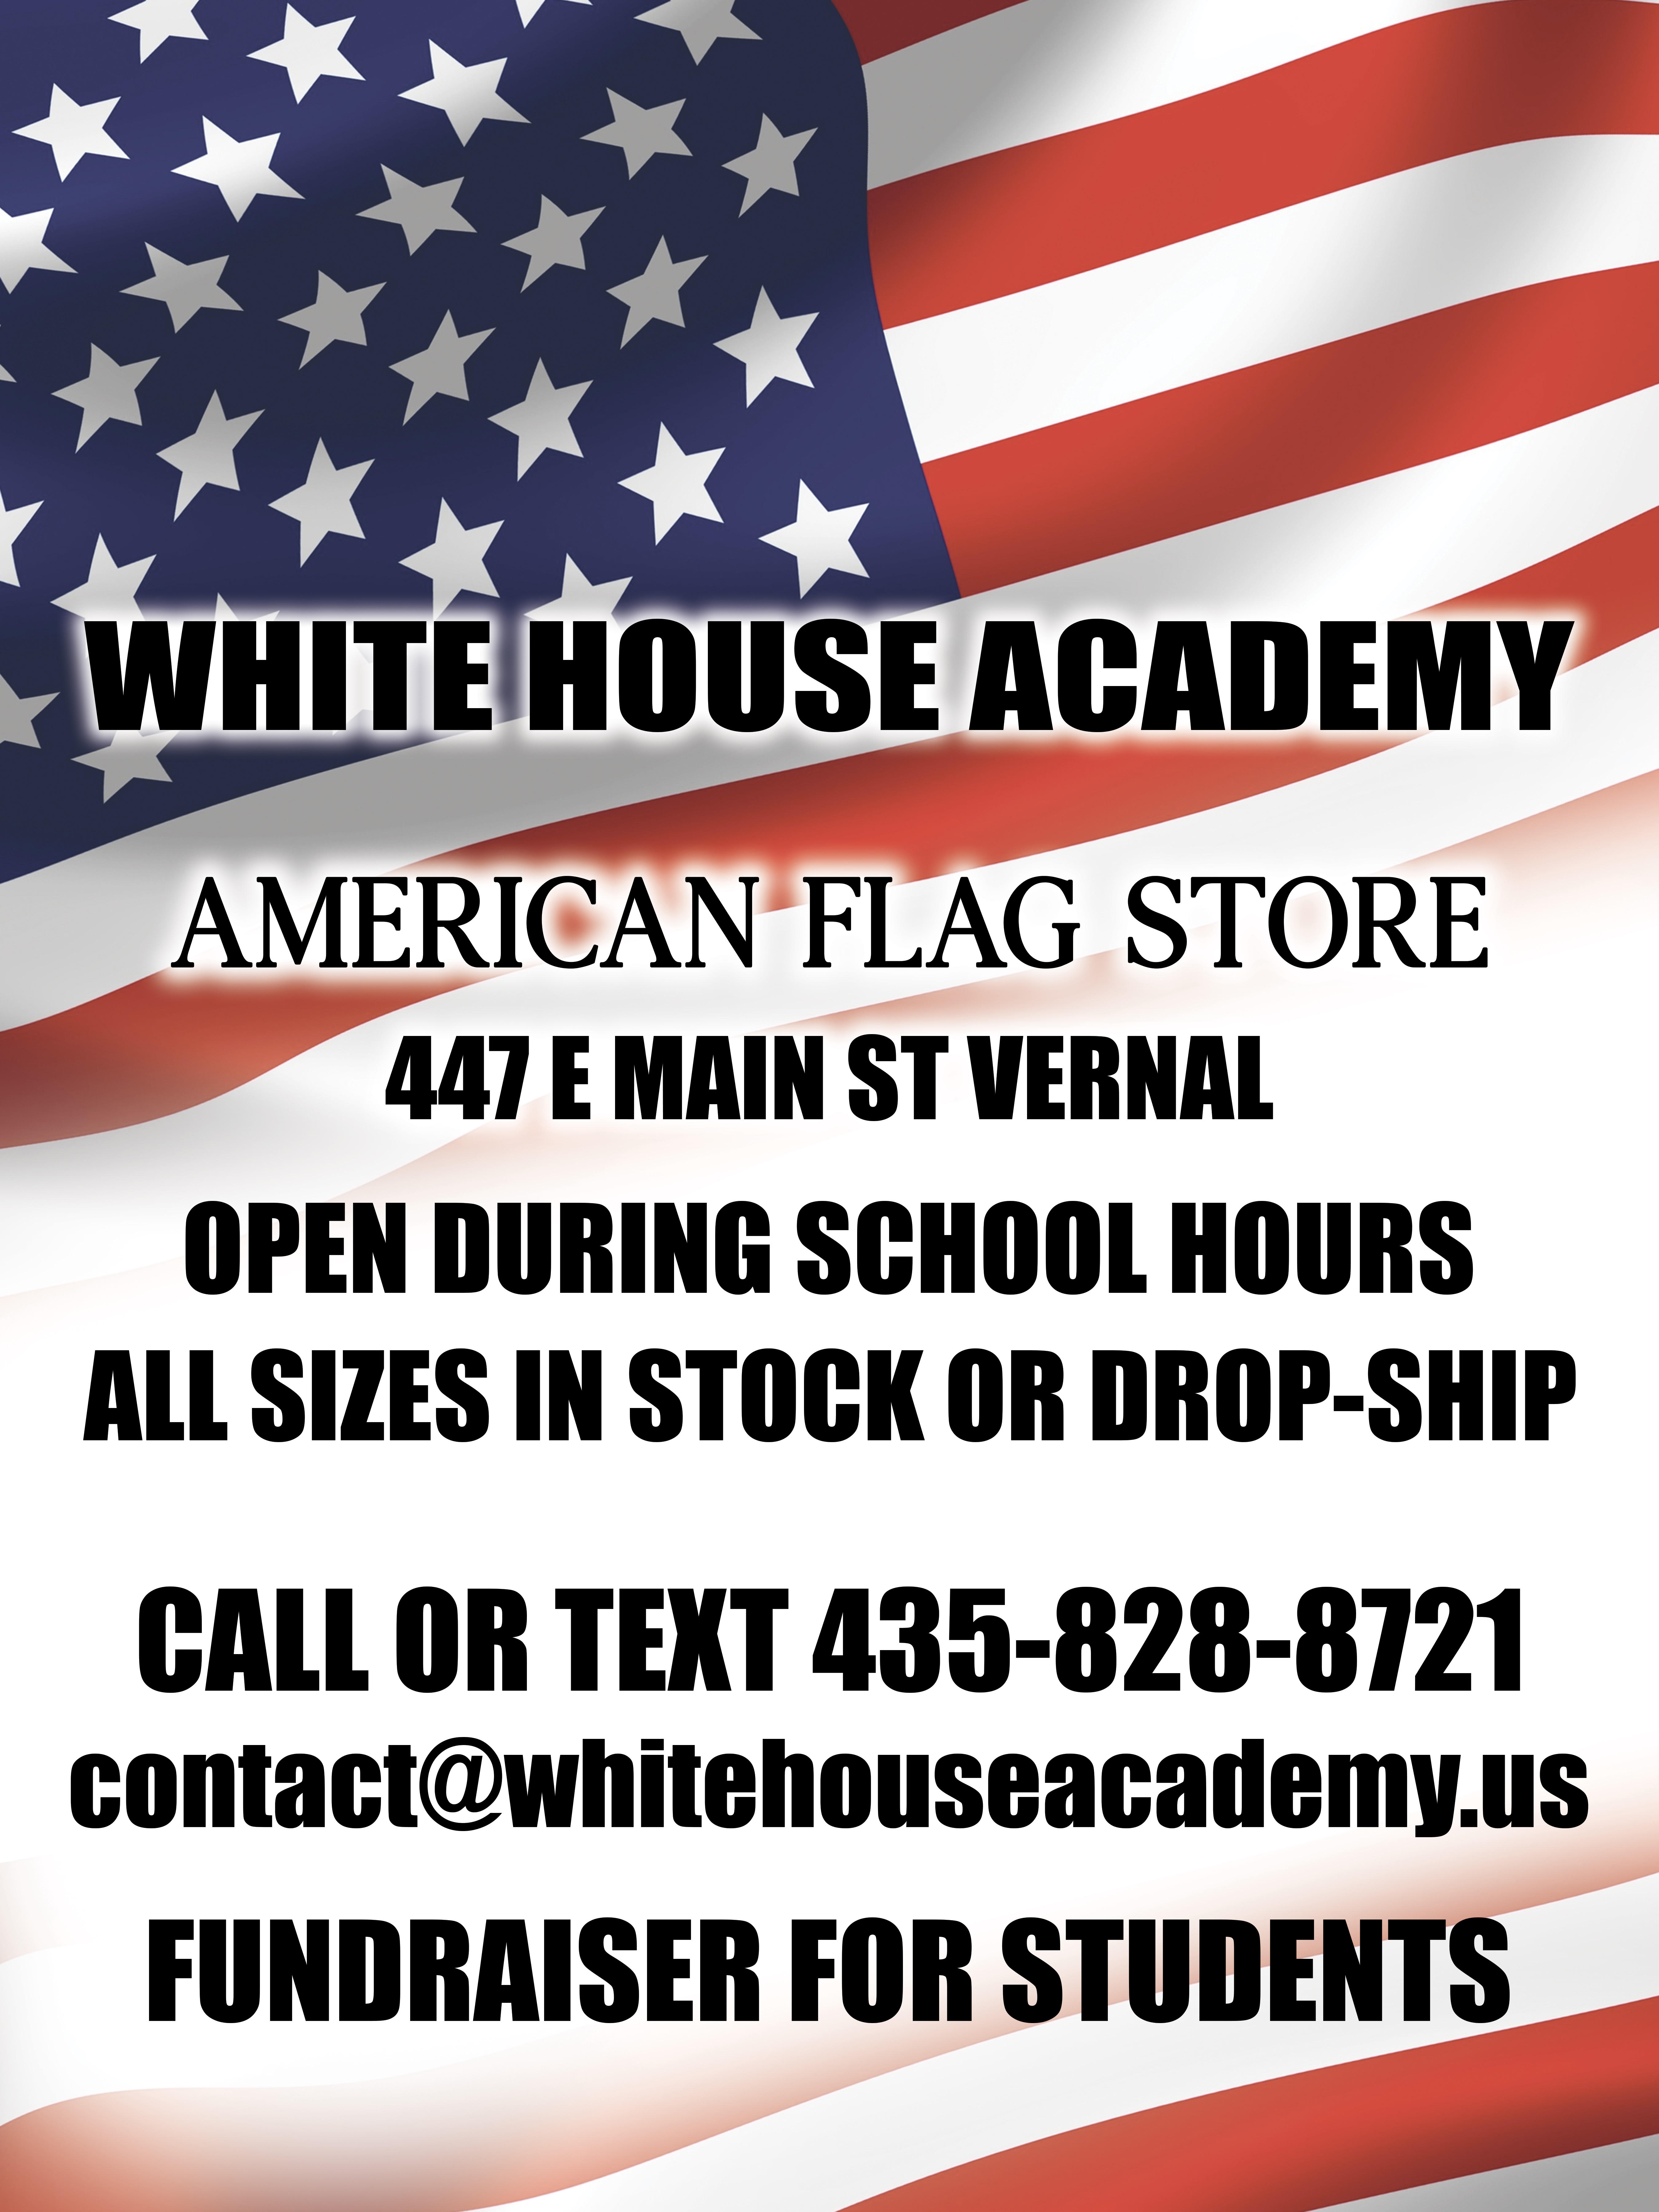 Your American Flag Store